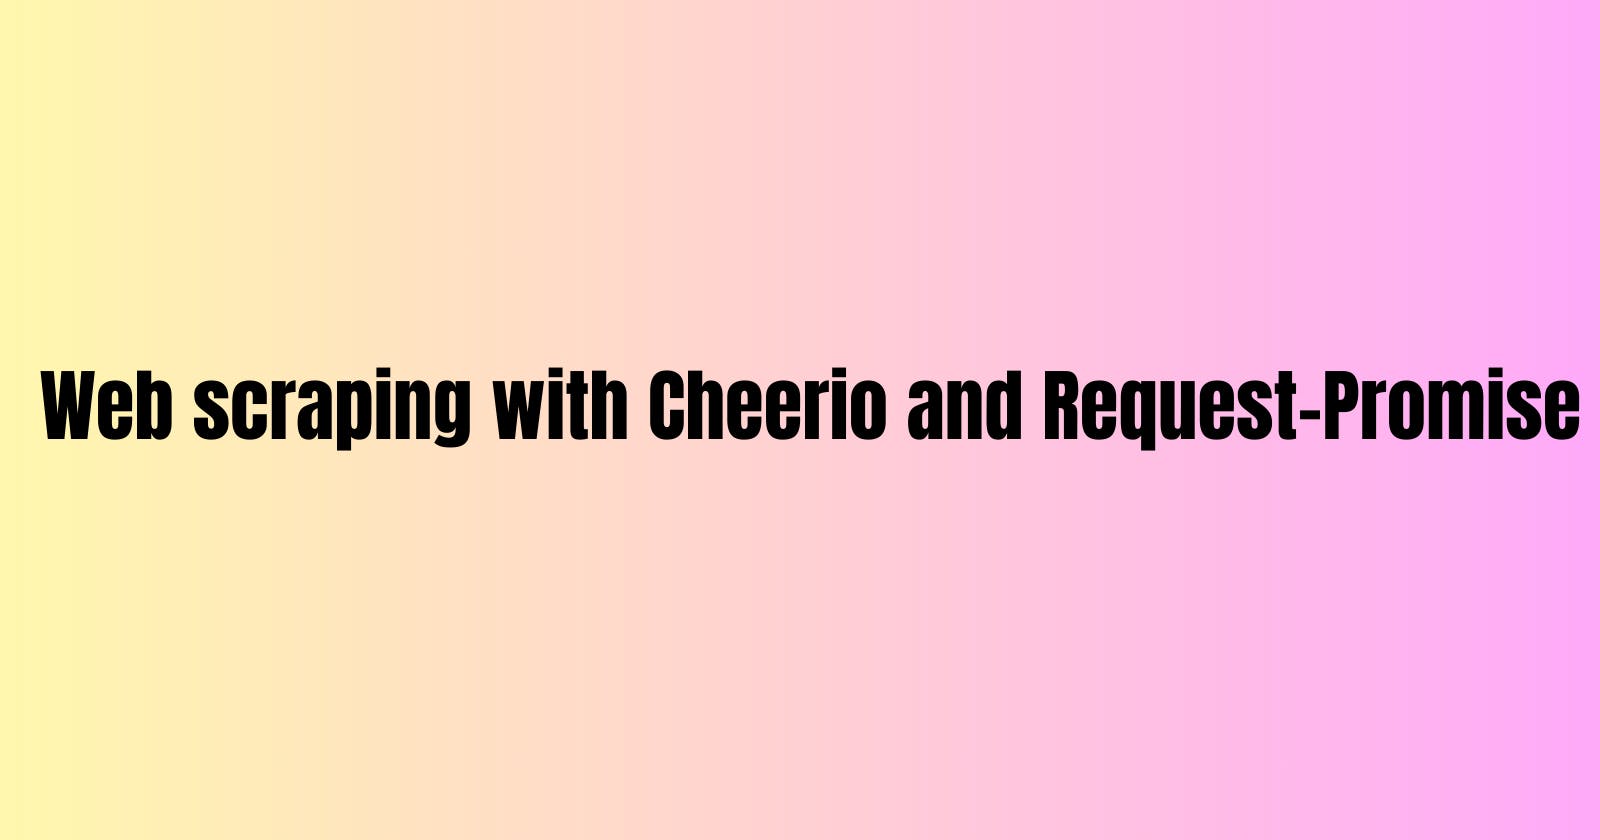 Web scraping with Cheerio and the Request-Promise.